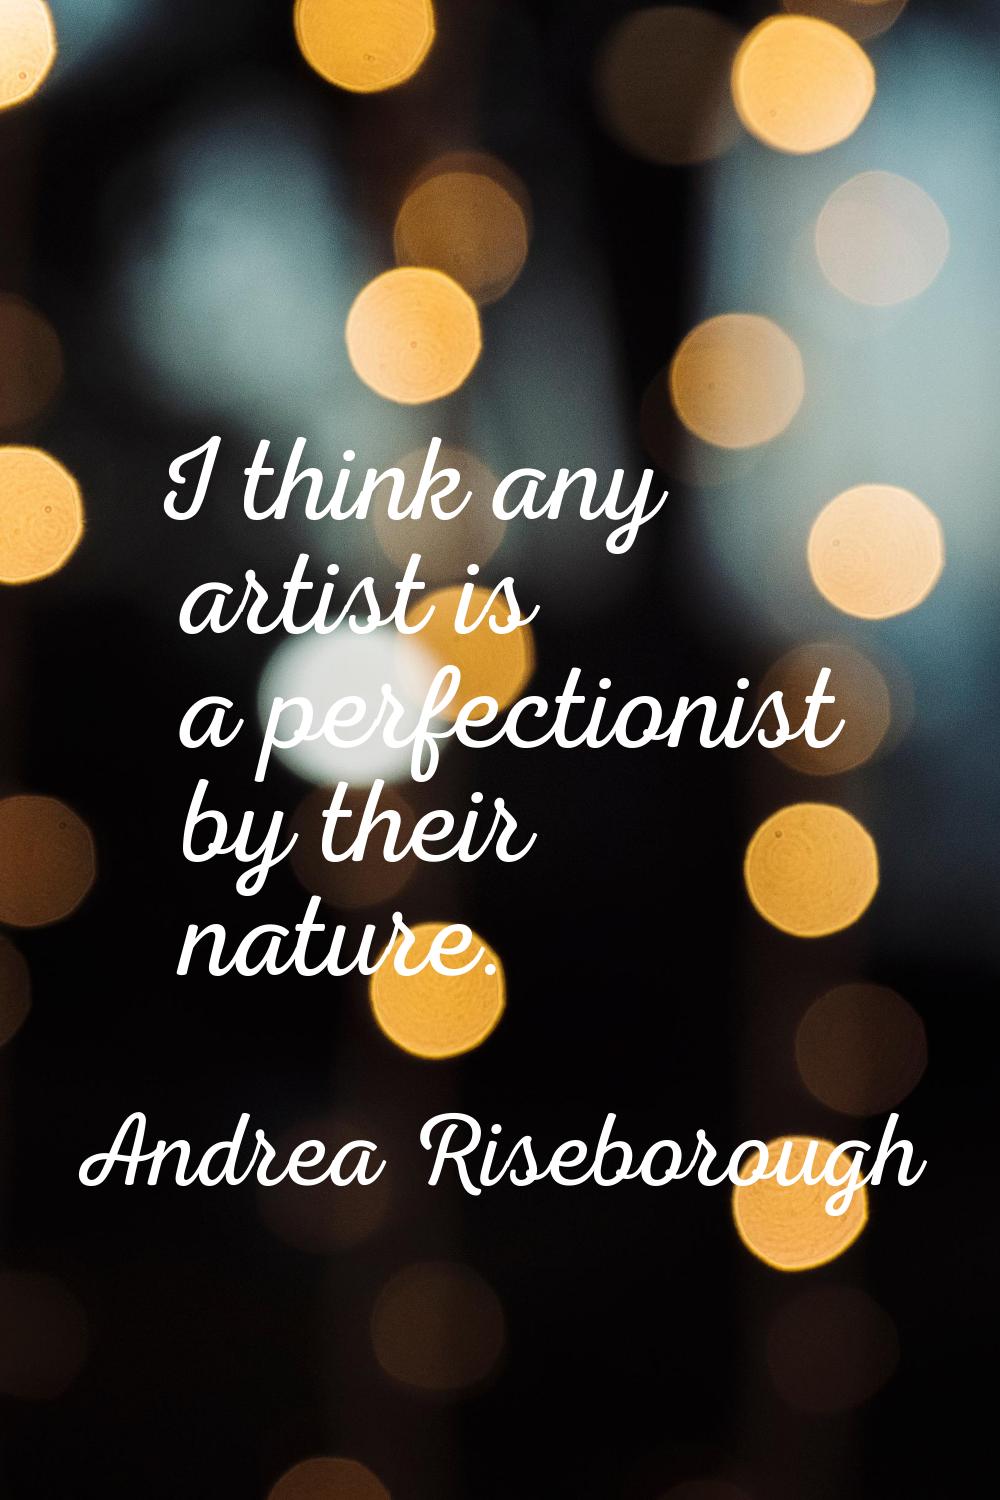 I think any artist is a perfectionist by their nature.